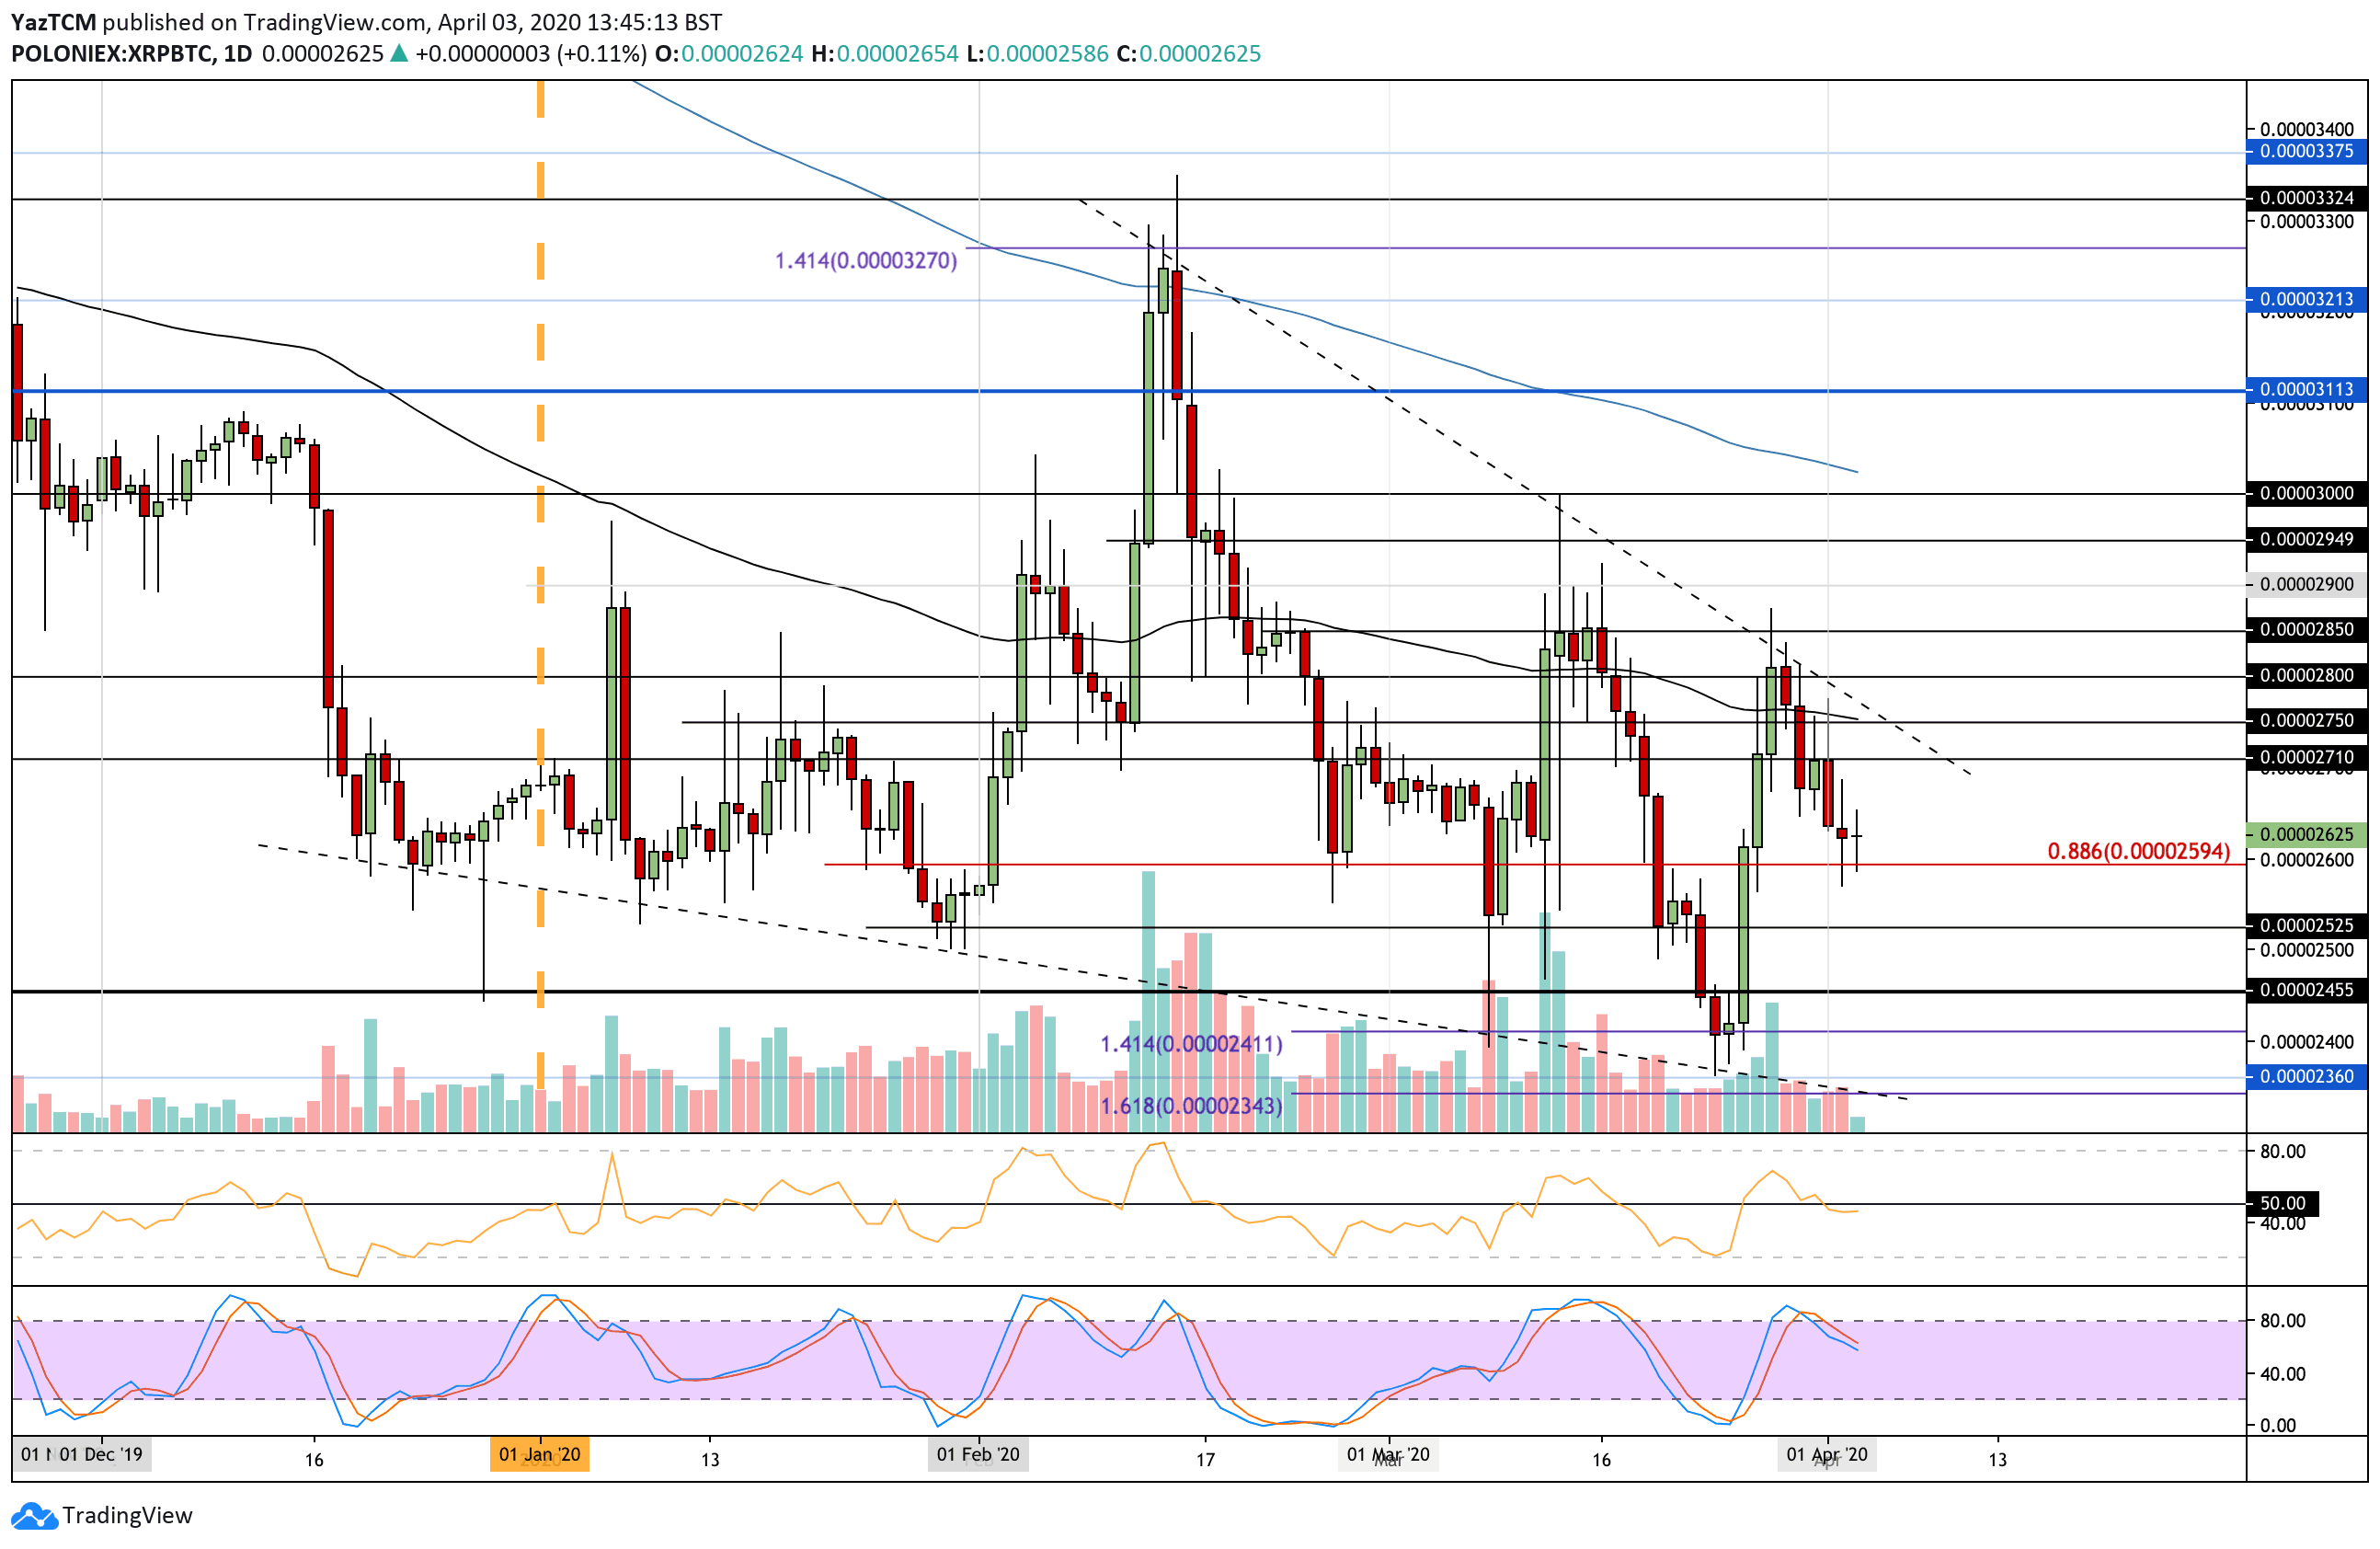 Crypto Price Analysis & Overview April 3rd: Bitcoin, Ethereum, Ripple, EOS, and Tezos